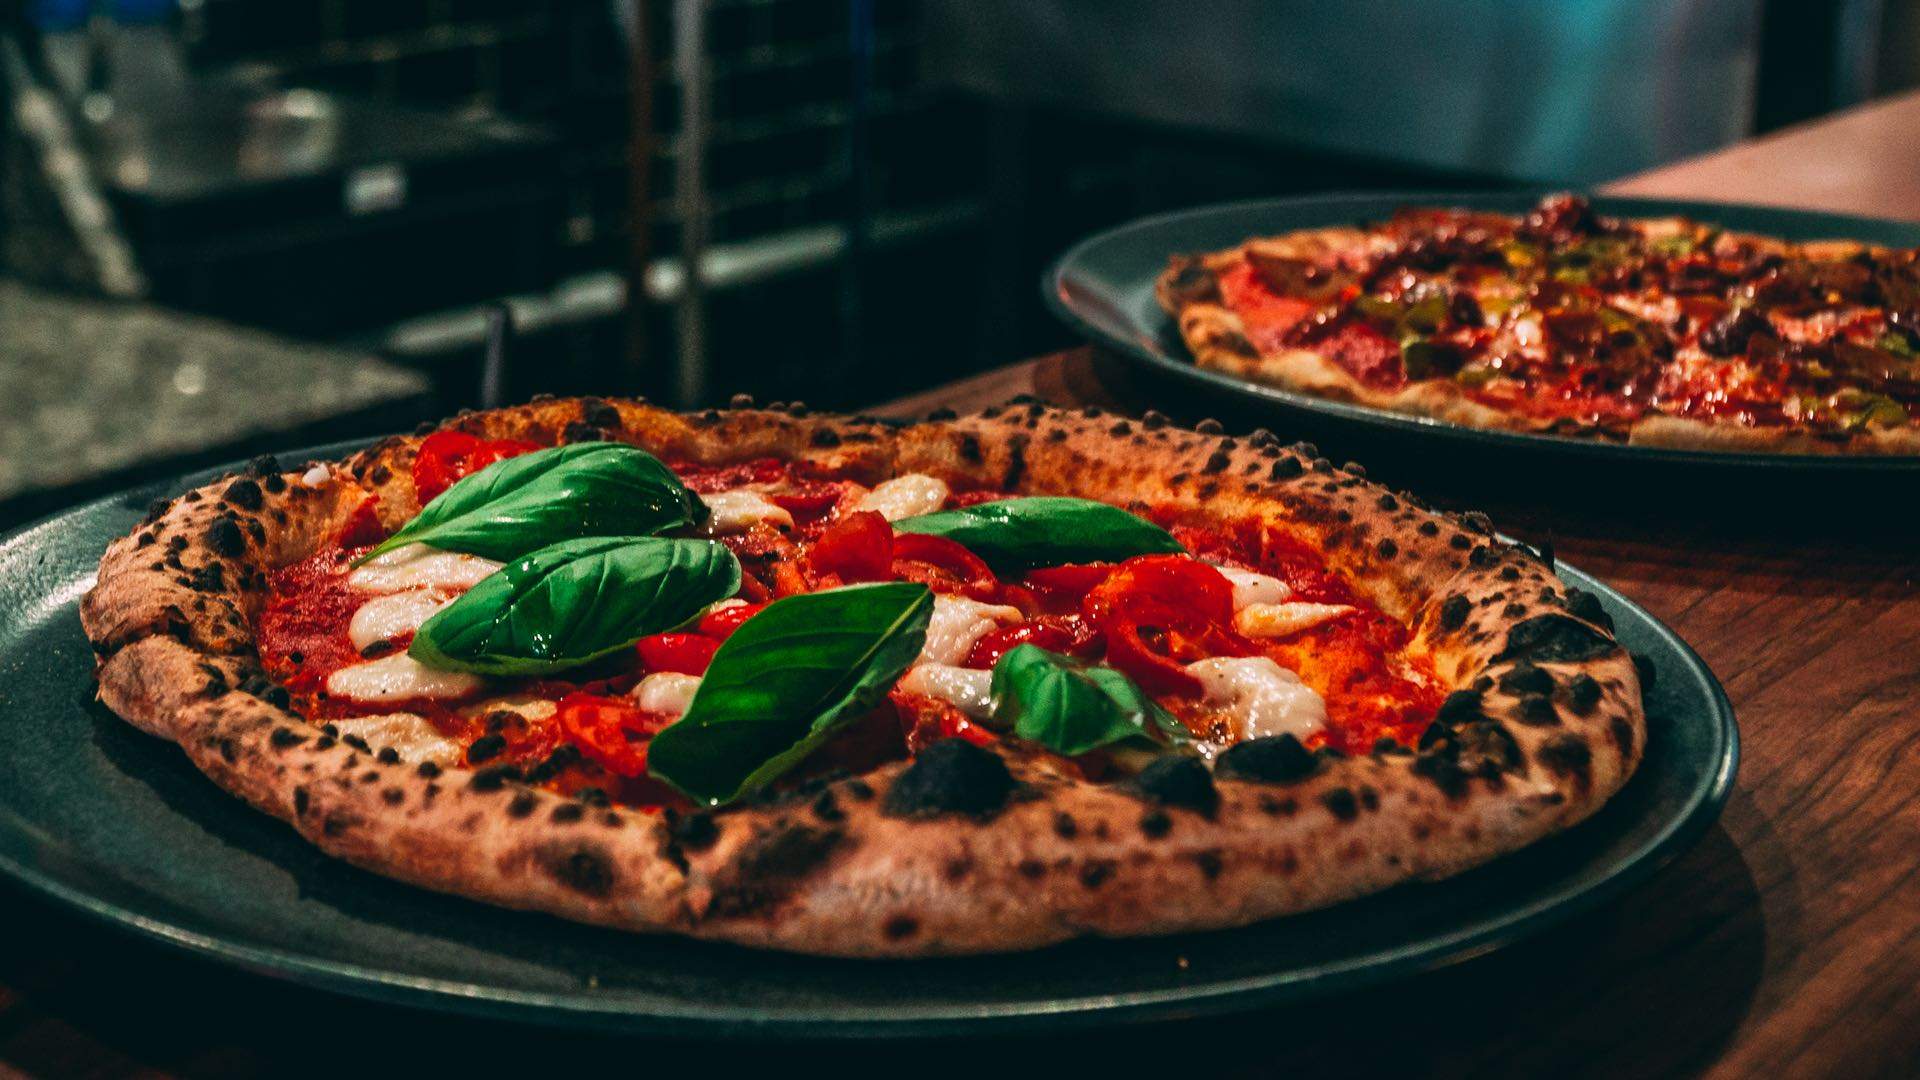 Melbourne's Beloved All-Vegan Pizza Joint Red Sparrow Just Doubled in Size